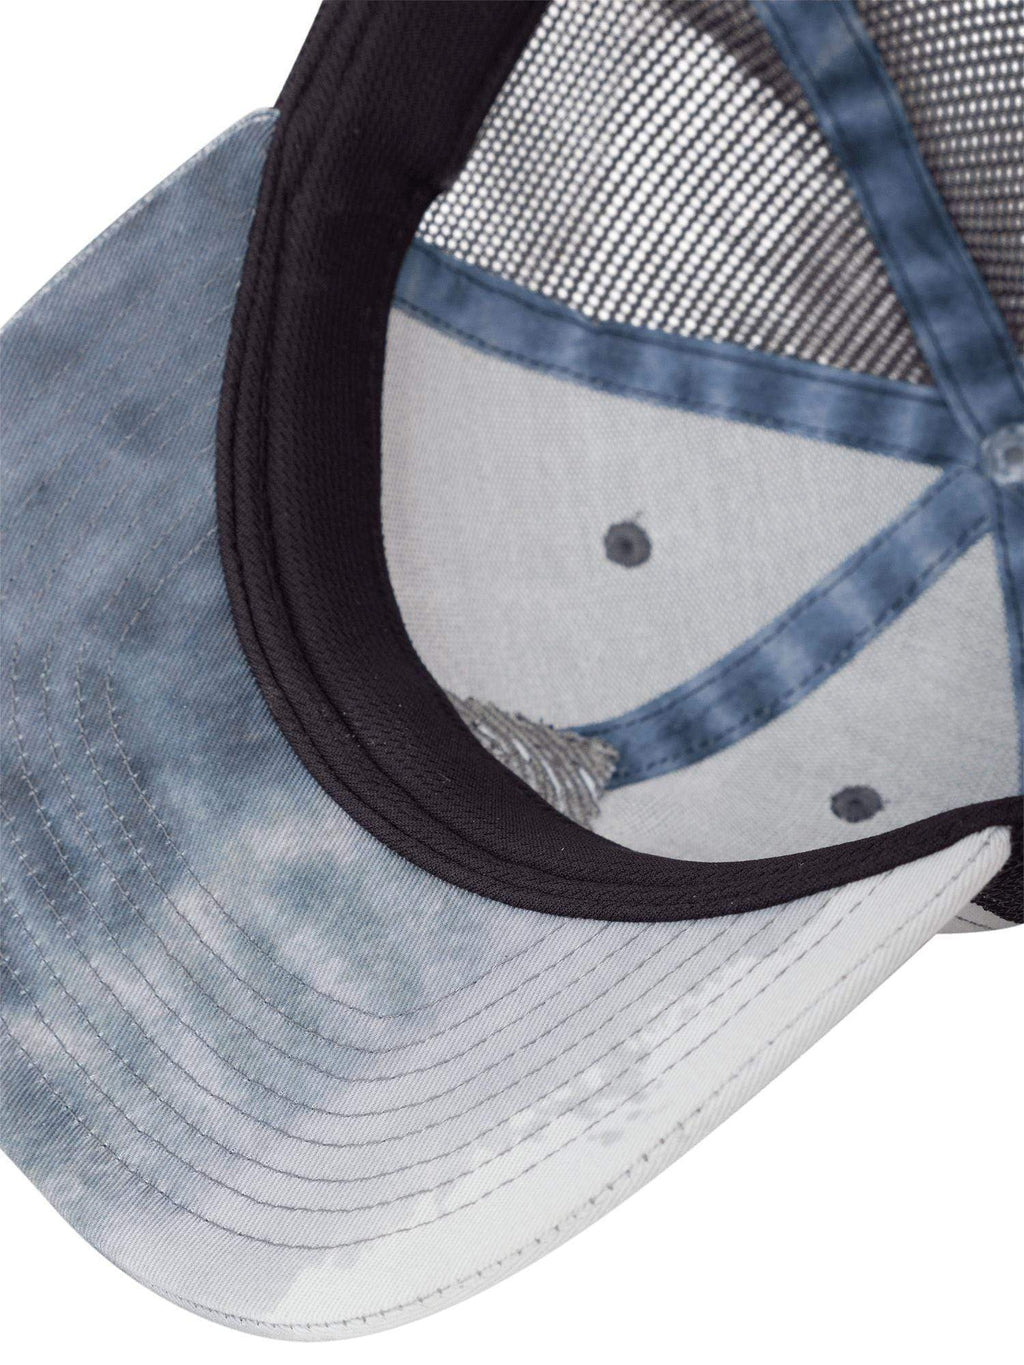 Close up image showing the interior and underside bill printing on a waterlust tiger shark printed recycled trucker cap hat and closed hole mesh antimicrobial sweatband